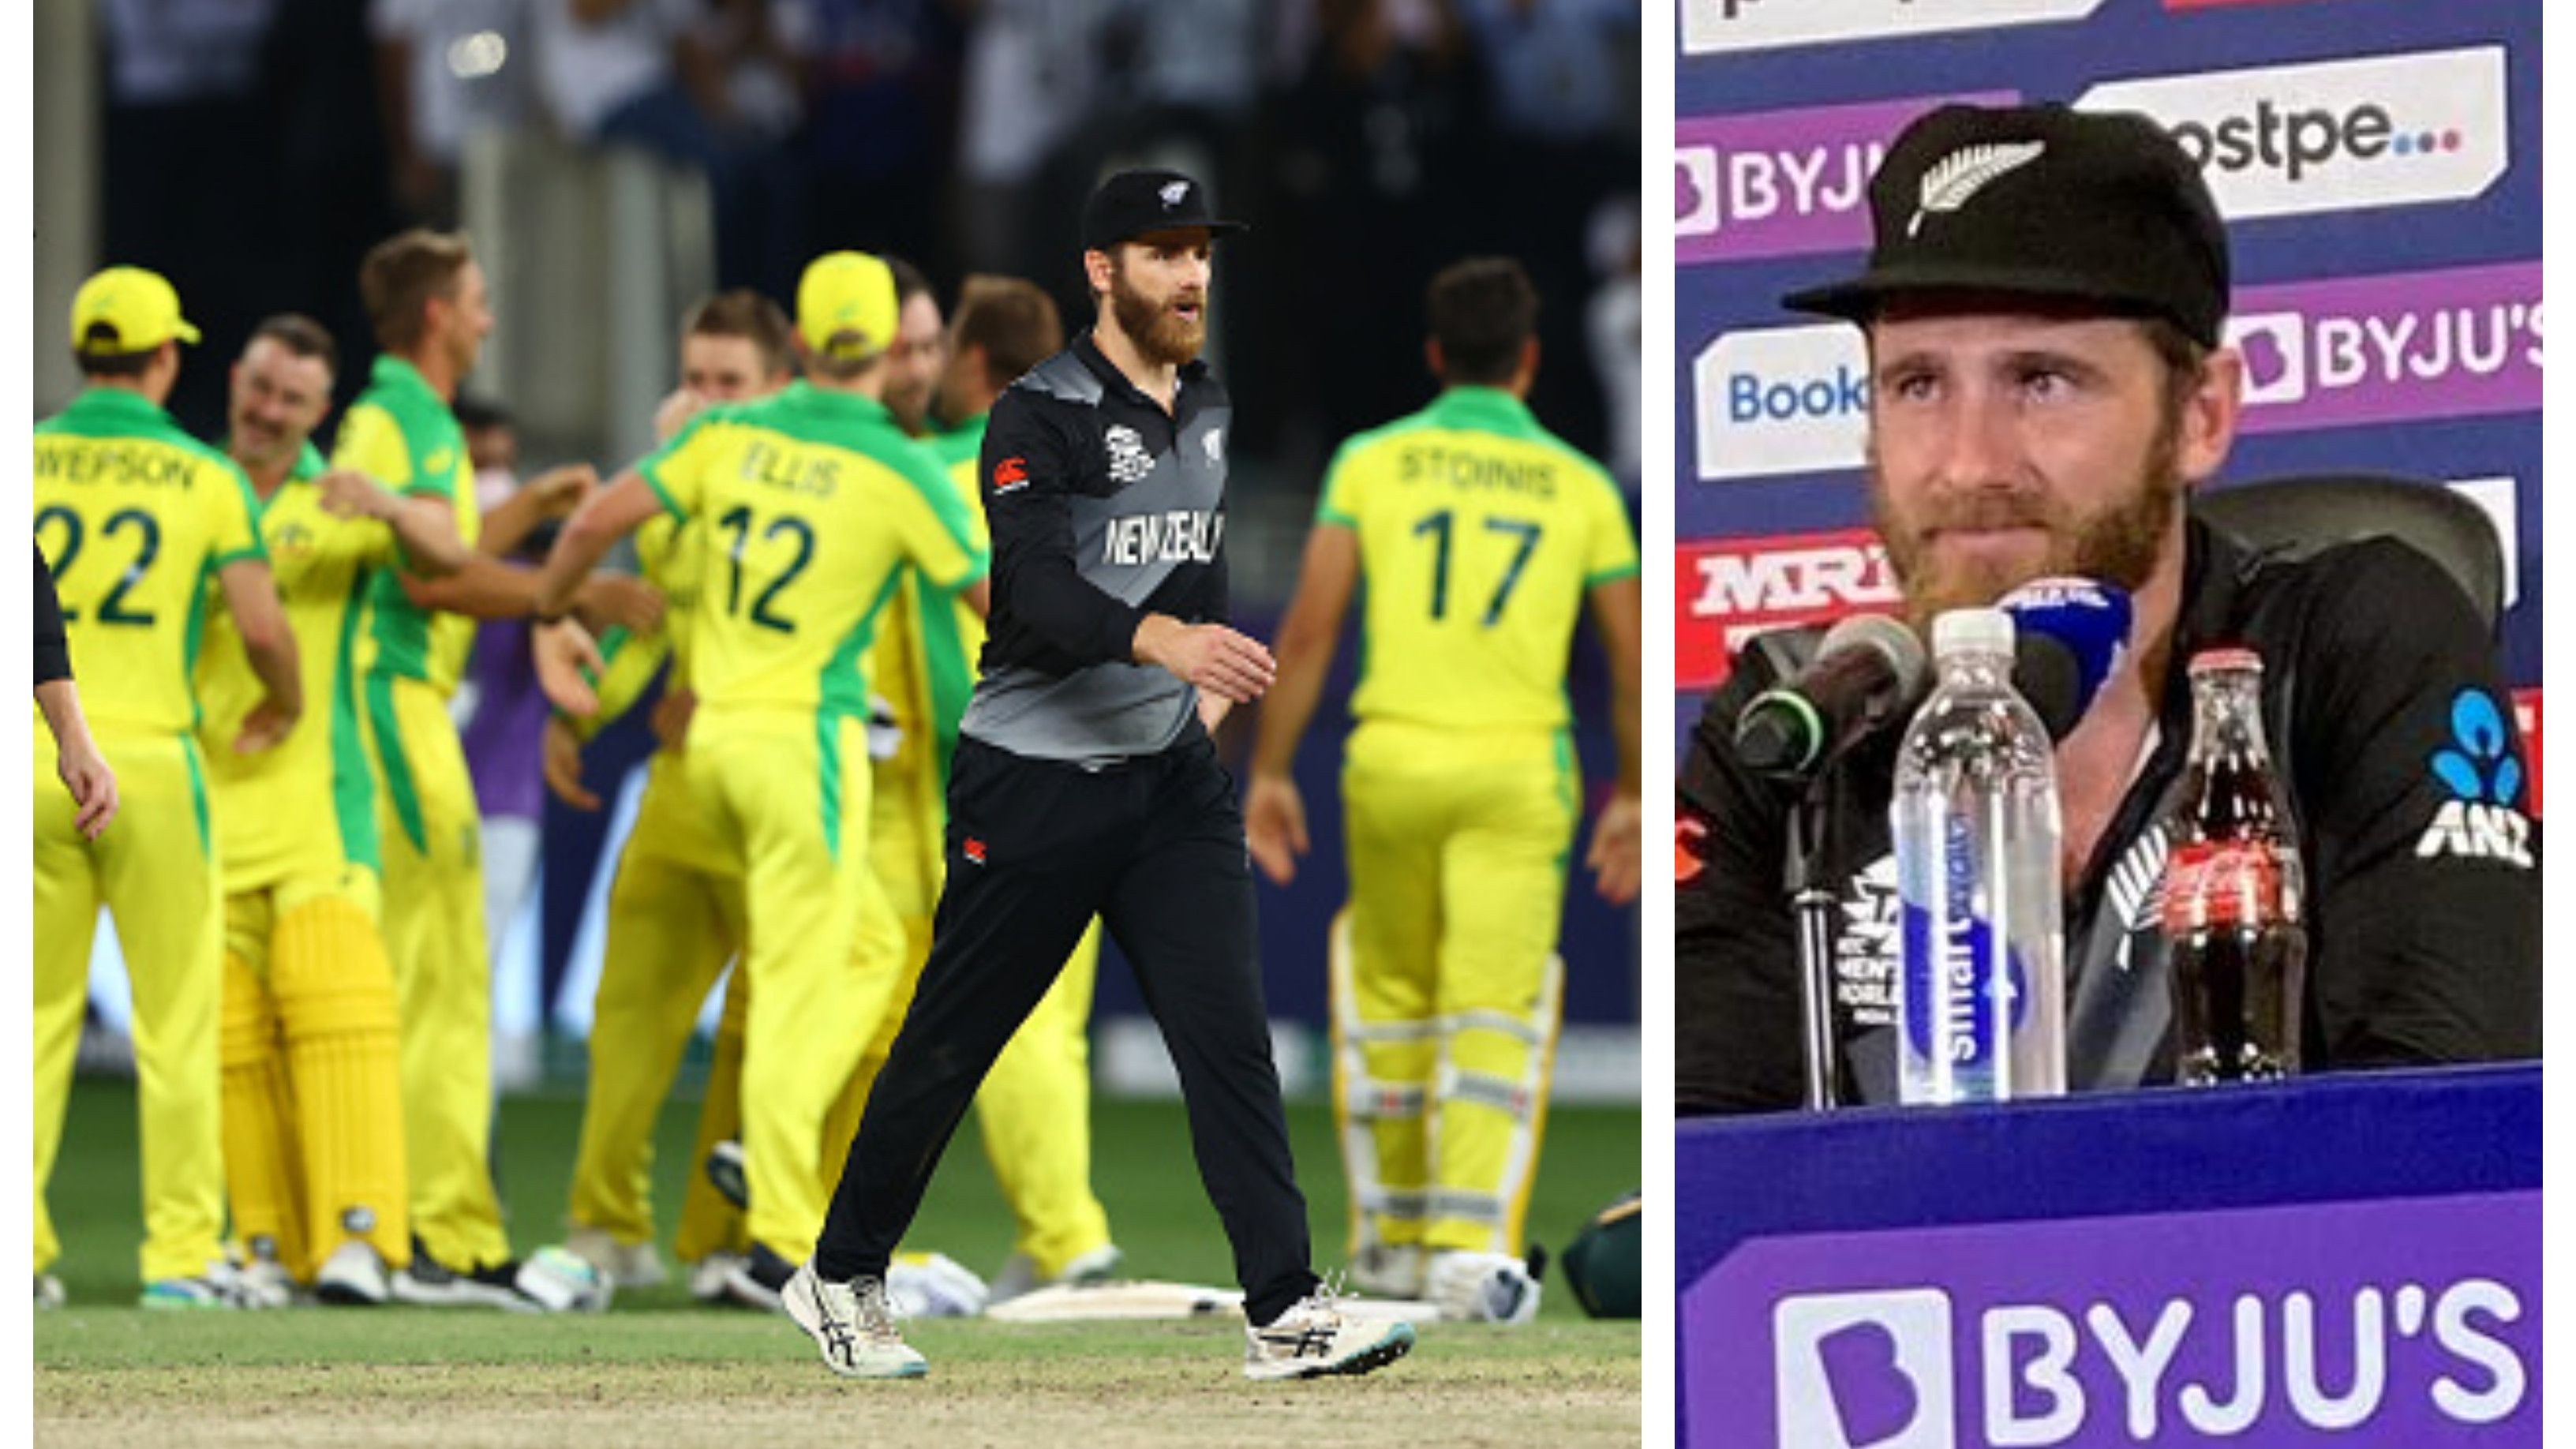 T20 World Cup 2021: “Yeah, it was a little bit frustrating”, says Williamson after New Zealand’s 3rd ICC trophy final loss